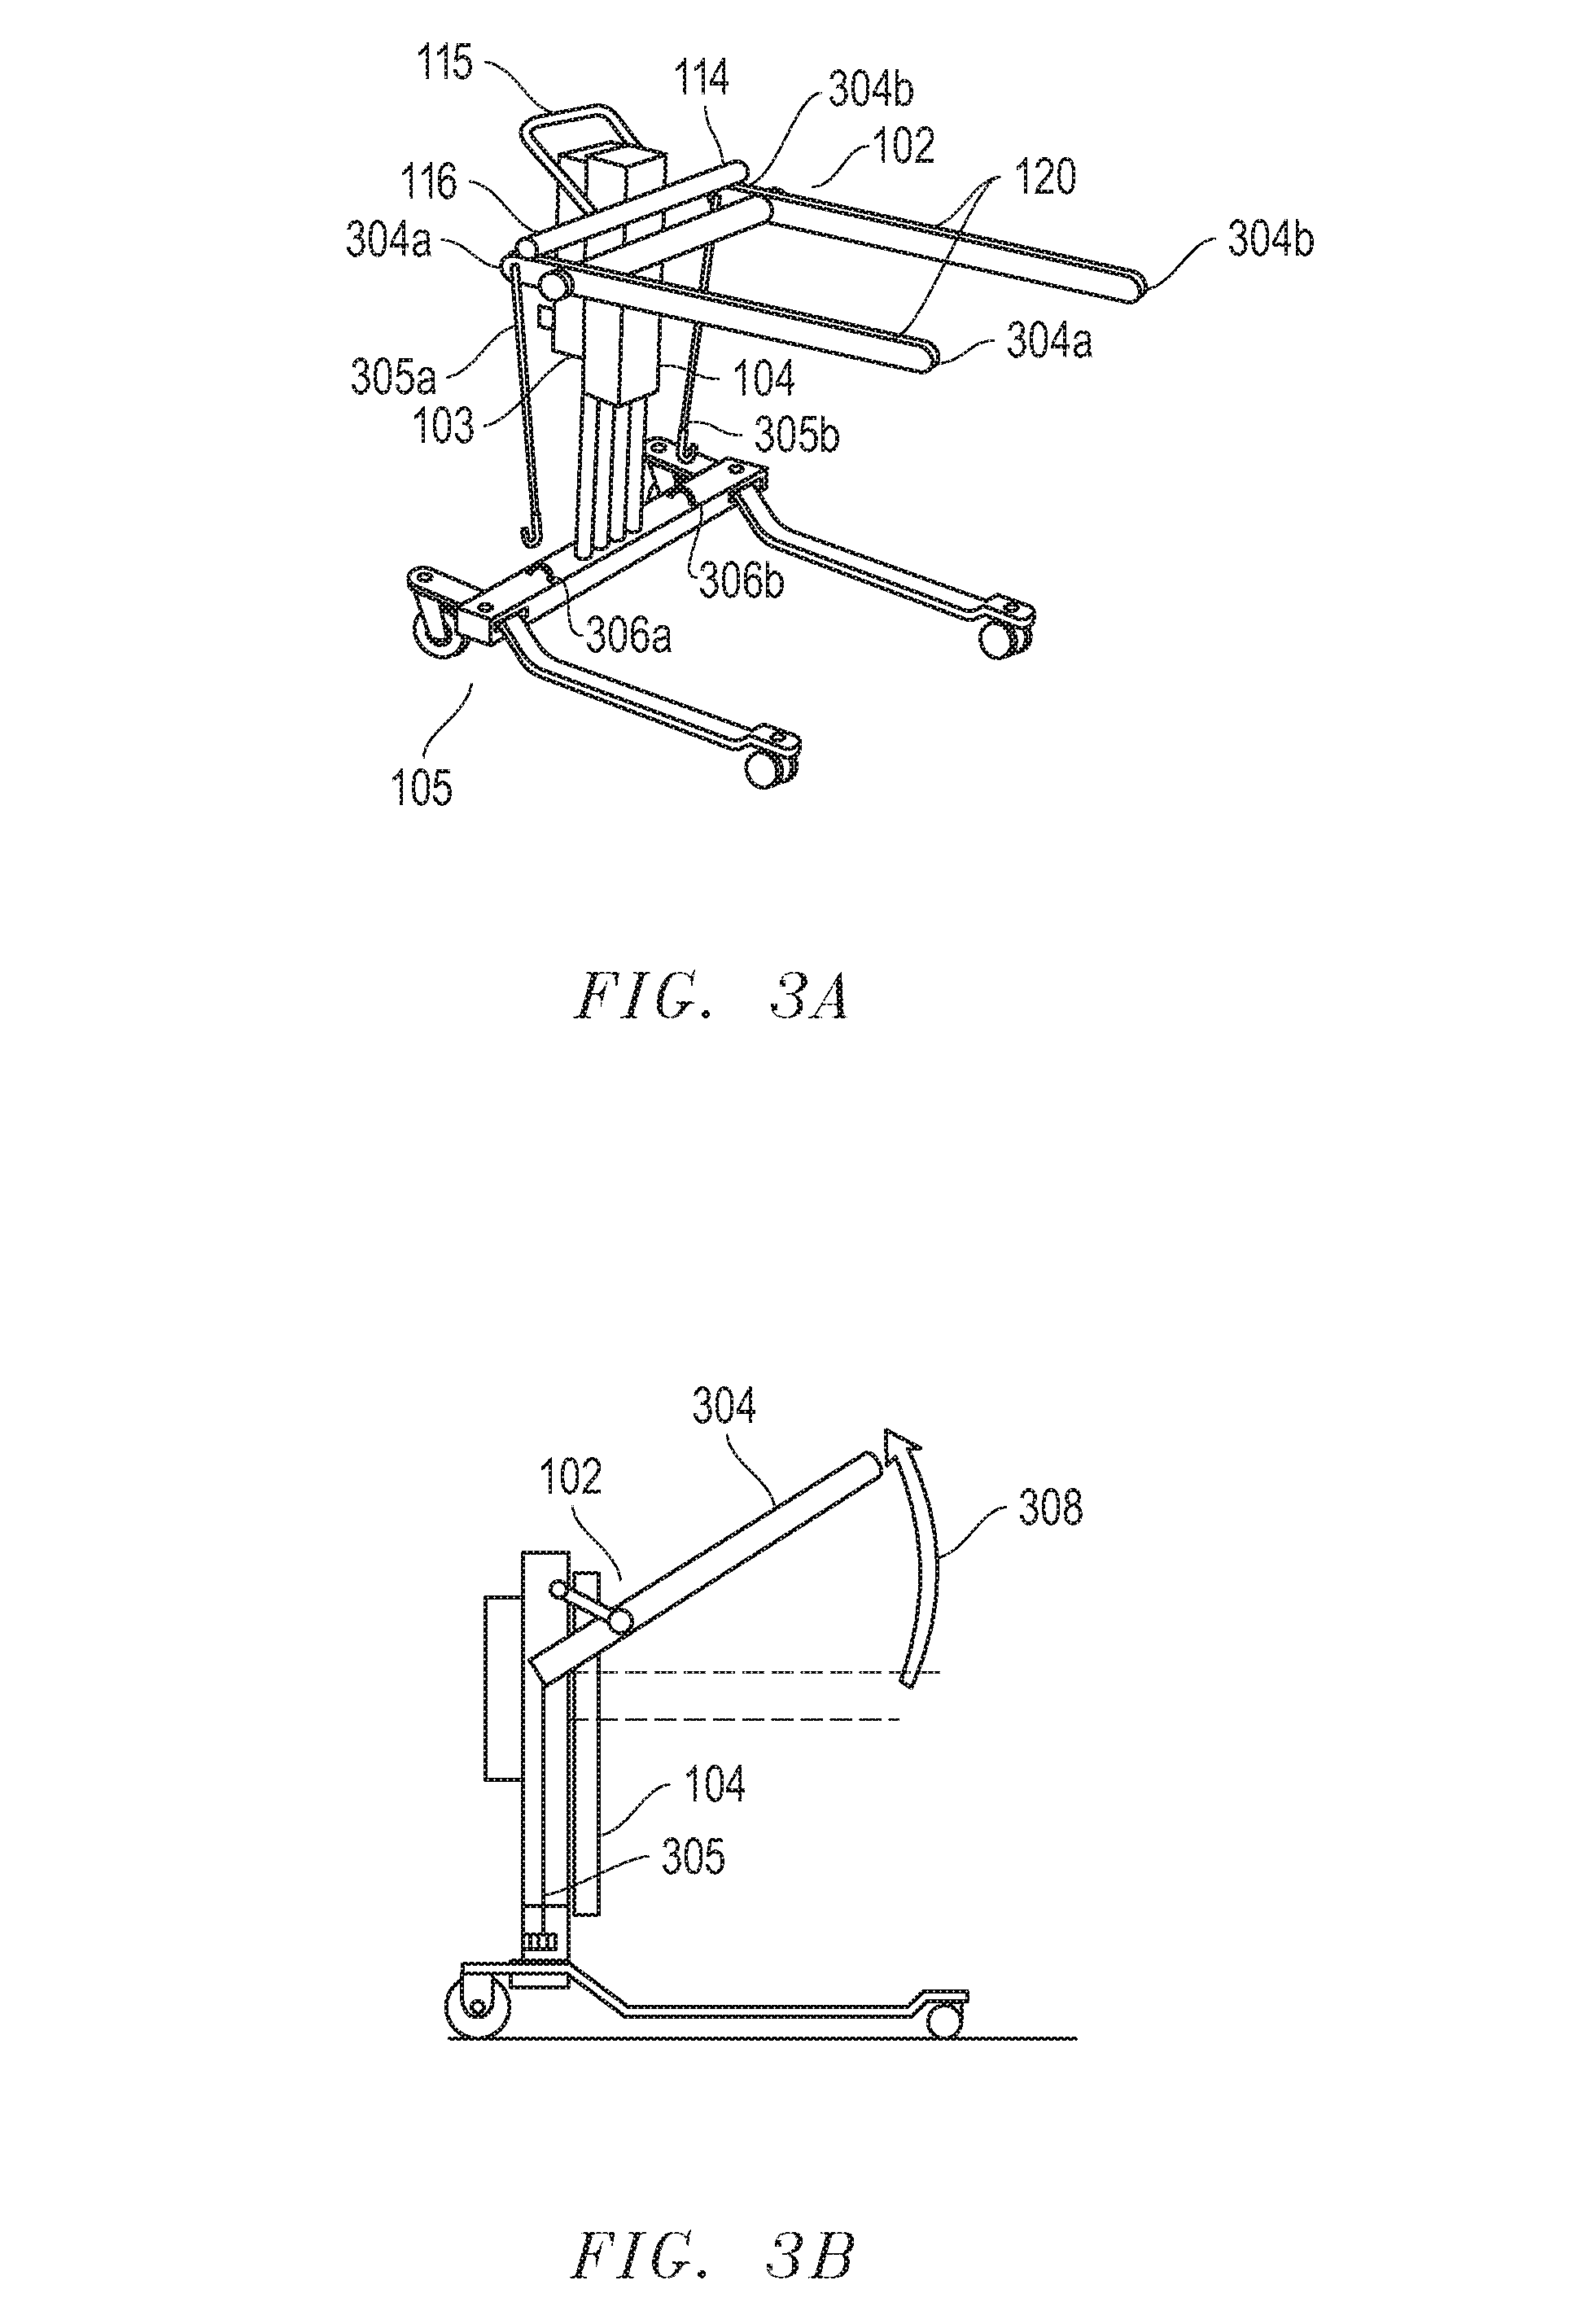 Multi-functional patient transfer device